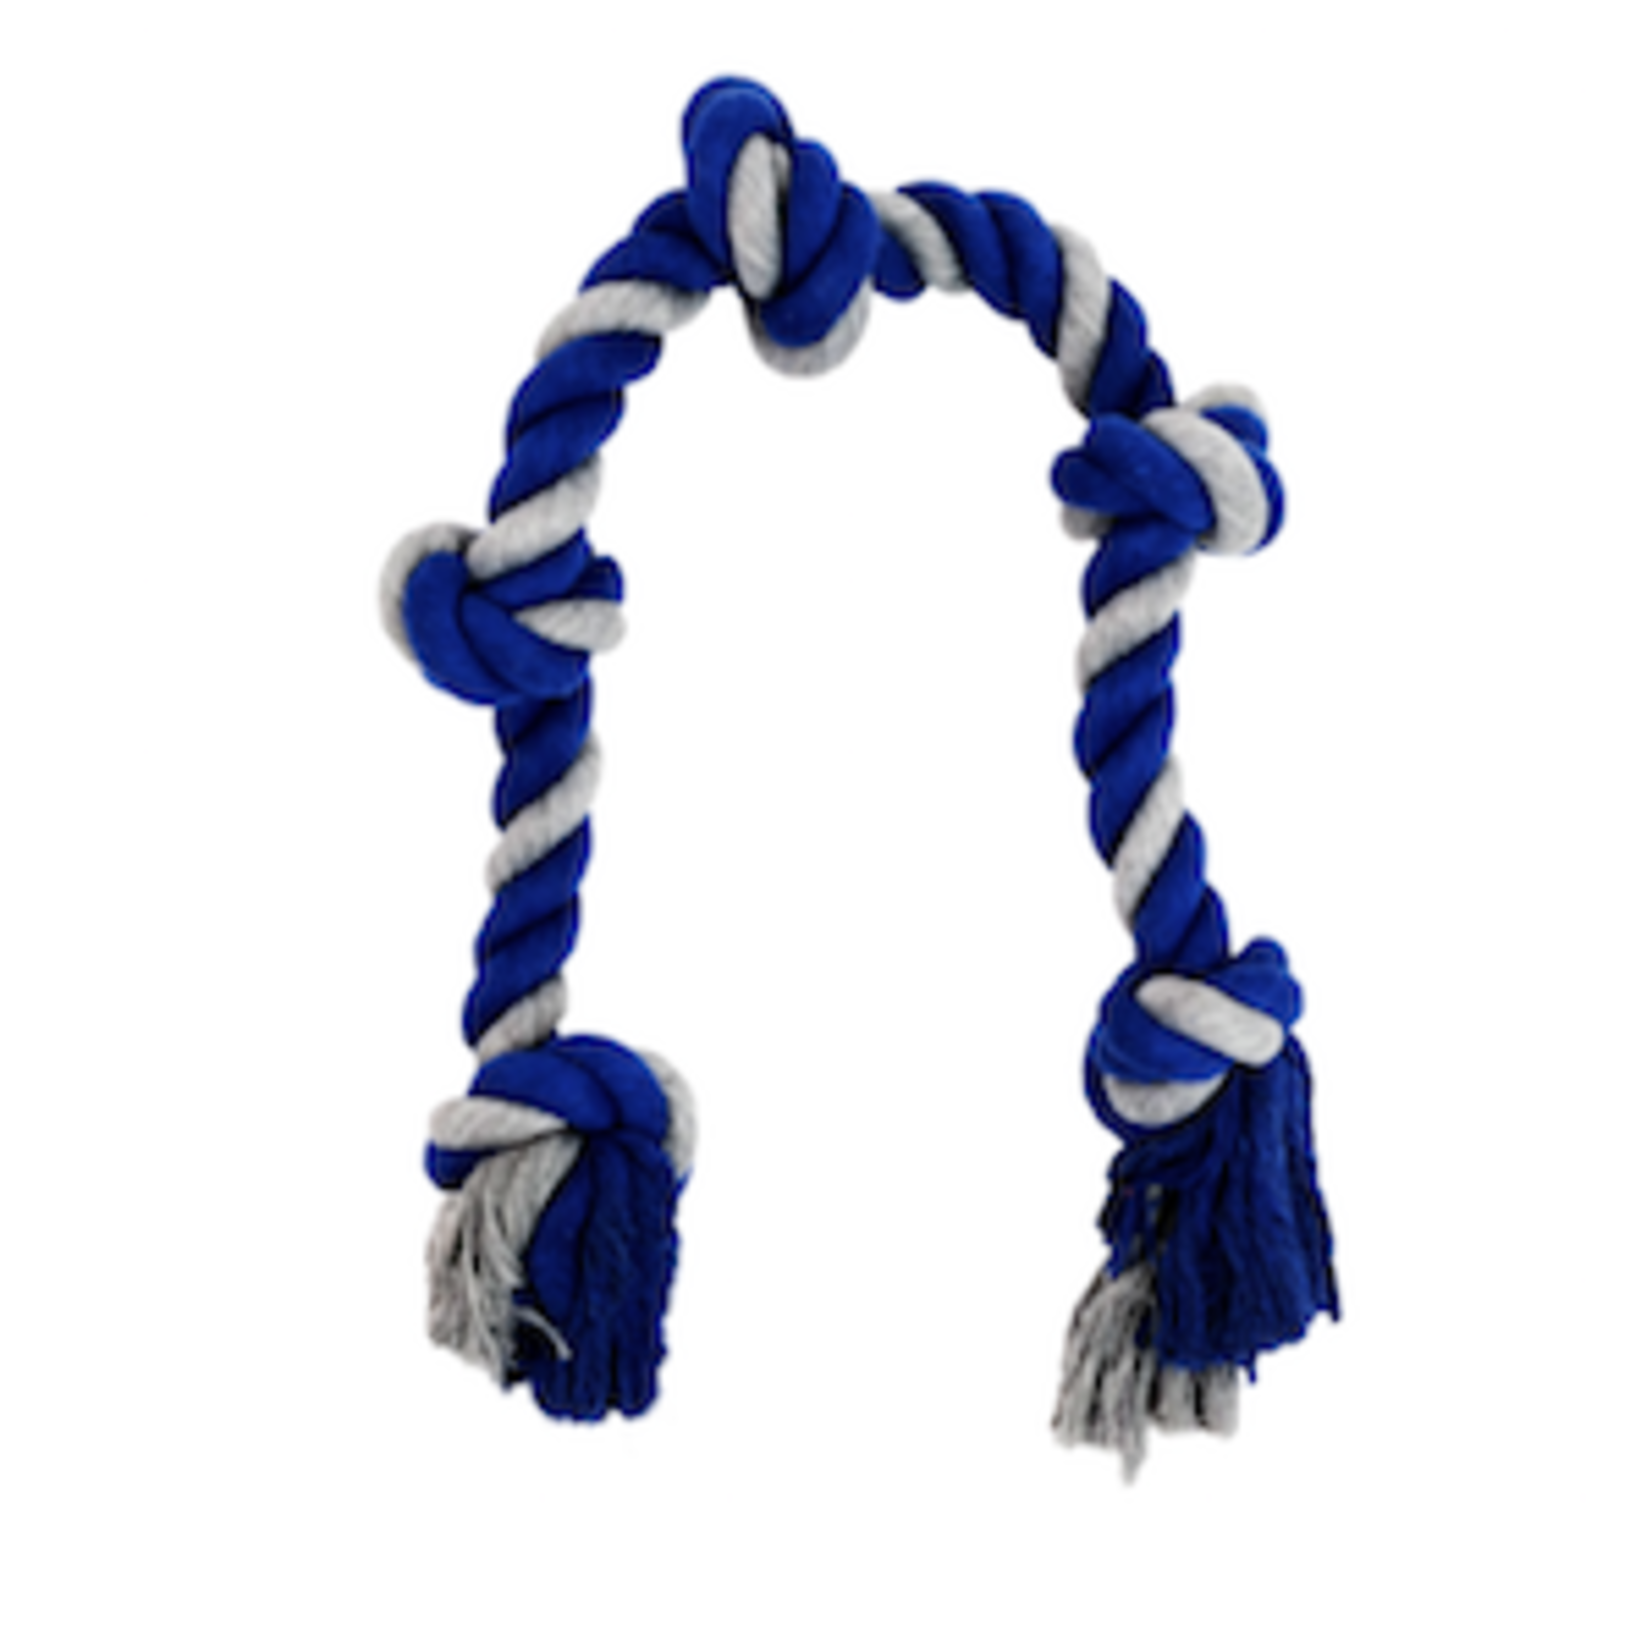 BUD-Z Bud'z Rope Dog Toy With 5 Knots Gray And Blue 35.5"